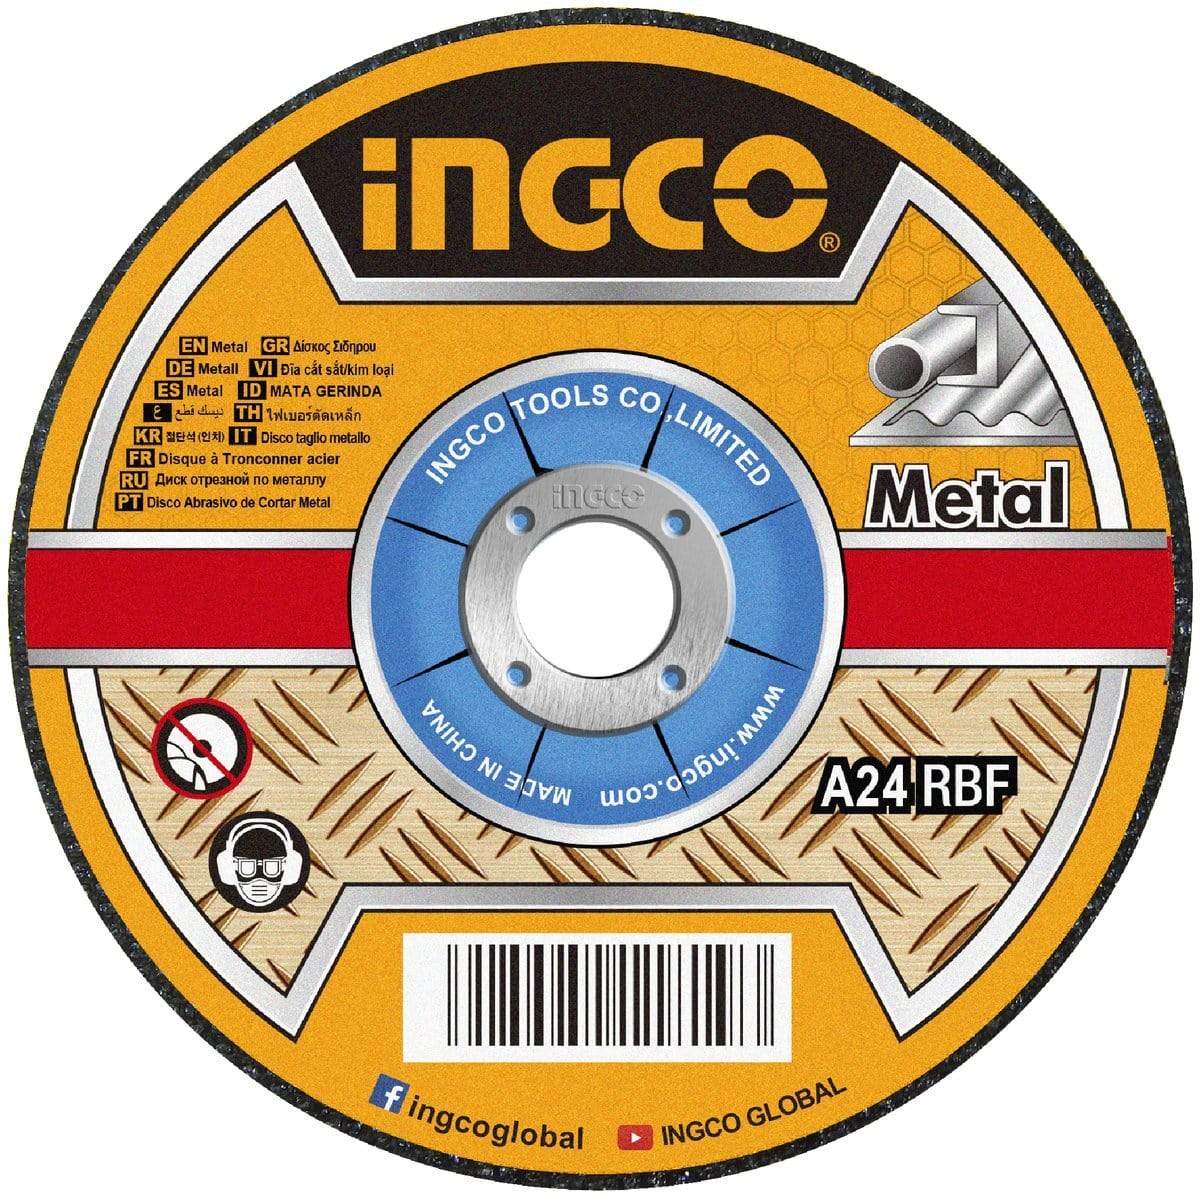 Buy Ingco 7" Abrasive Metal Cutting Disc - MCD301801 in Accra, Ghana | Supply Master Grinding & Cutting Wheels Buy Tools hardware Building materials